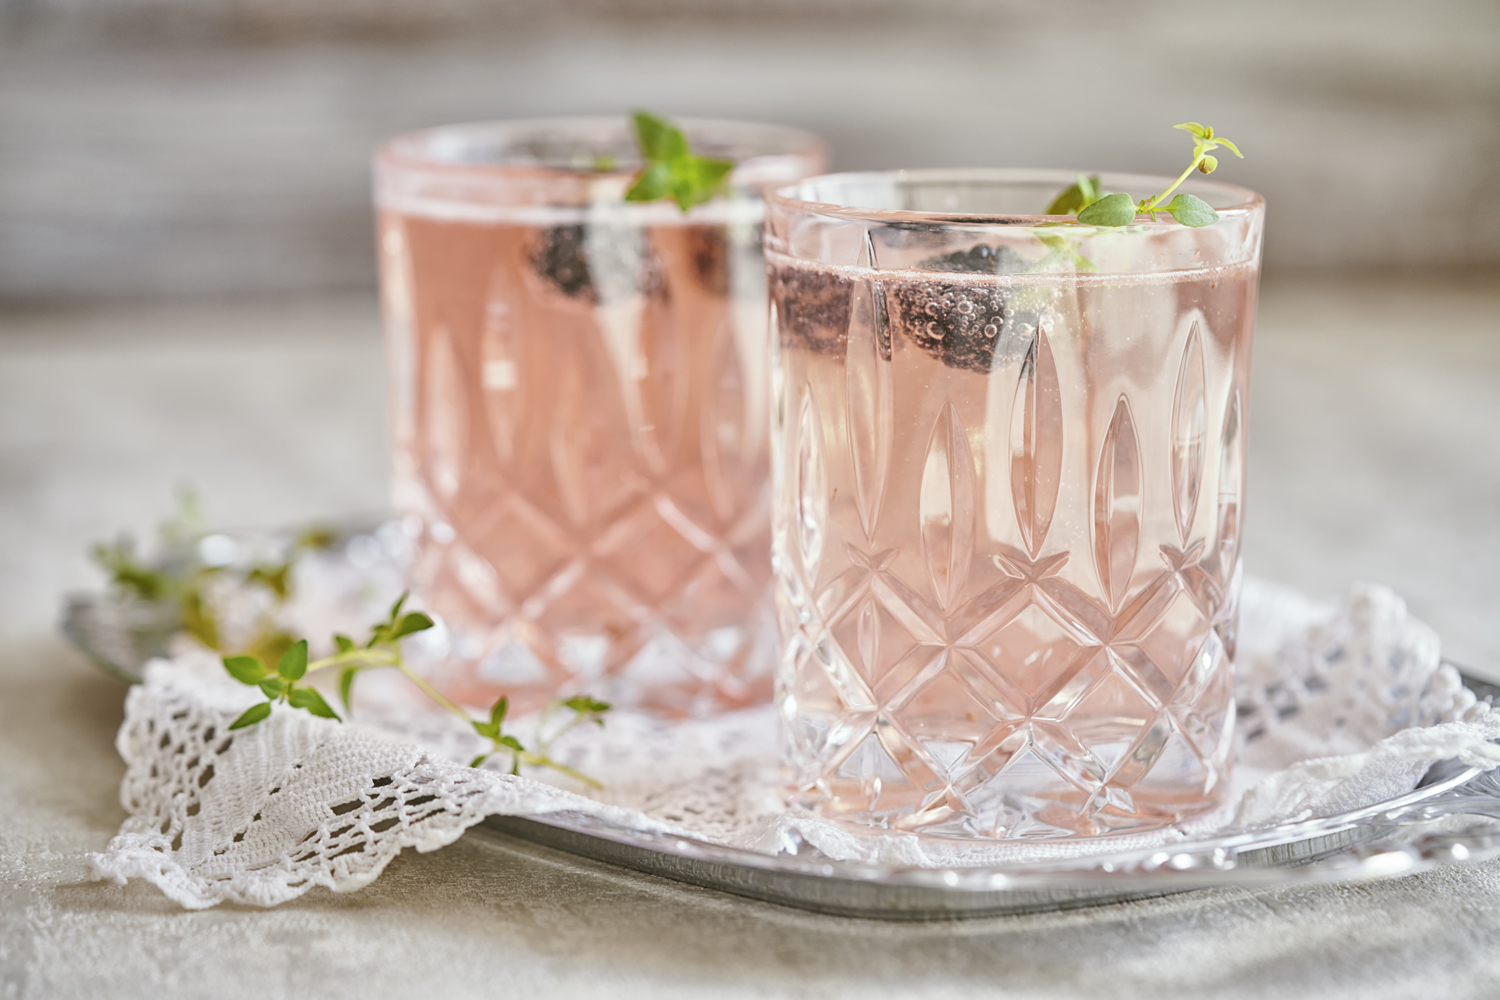 Two glasses of Rose cocktails with blueberry garnish on crocheted cloth on a metal tray